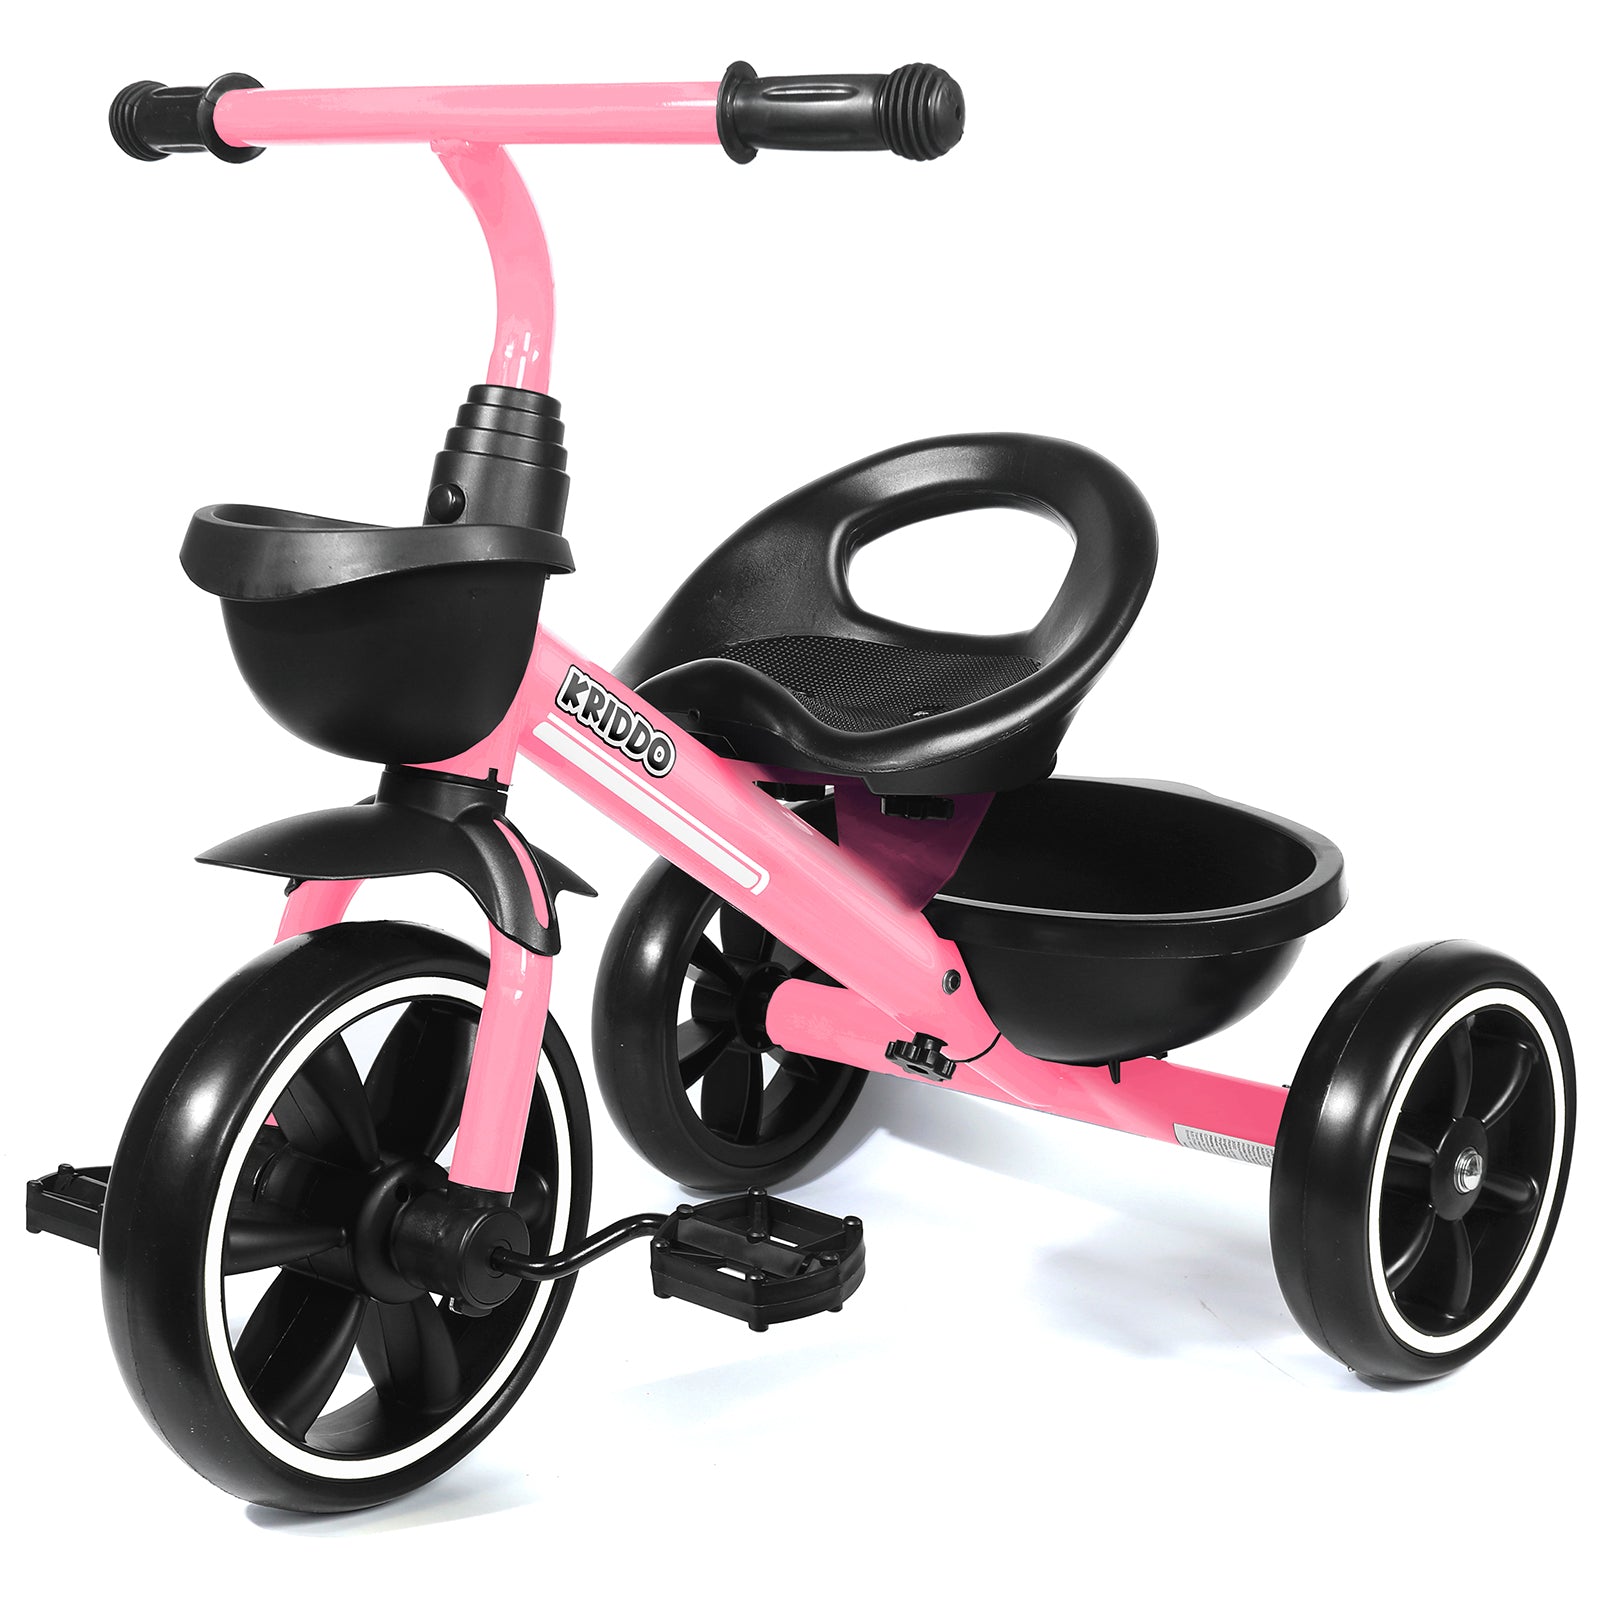 KRIDDO Kids Tricycles for 2-5 Years, Gift Toddler Tricycles for 2-5 Year Olds, Easy Assembly, Pink